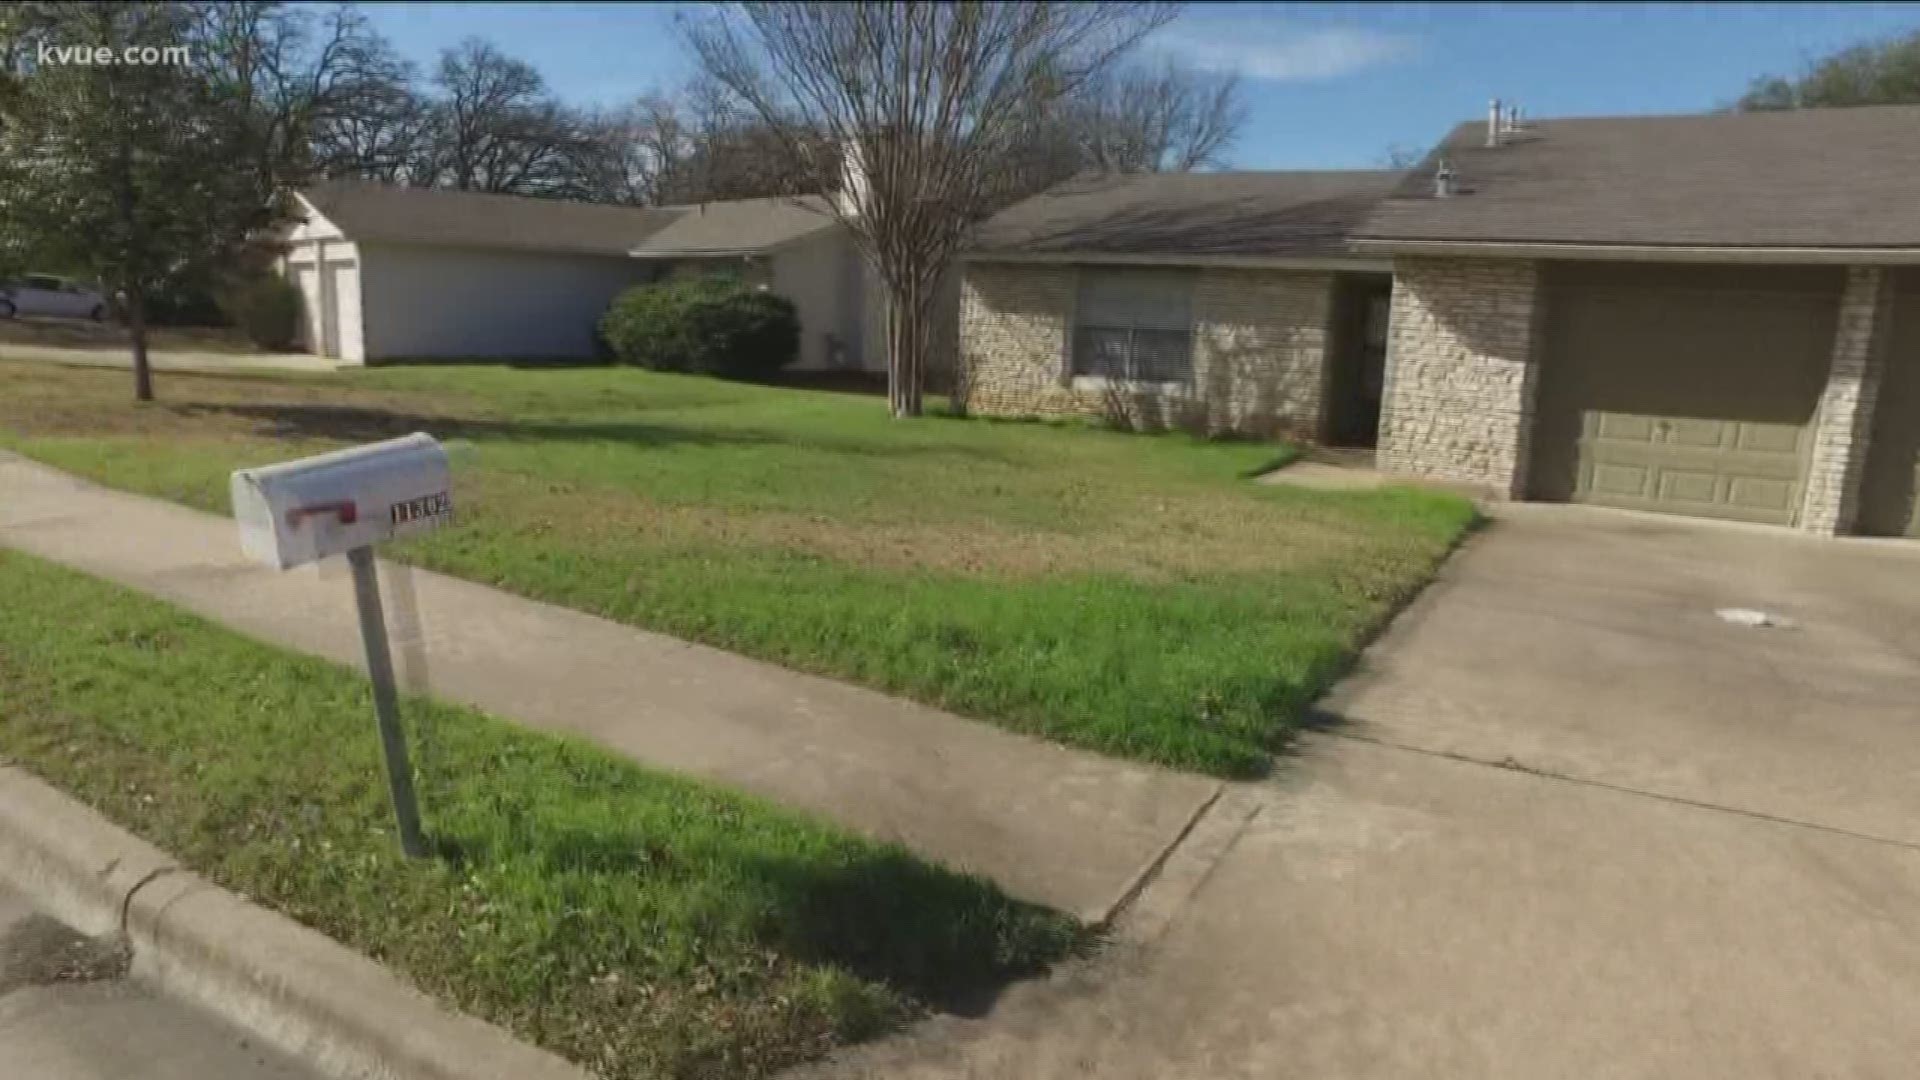 Property owners in Bastrop County owe nearly $2M in delinquent taxes |  